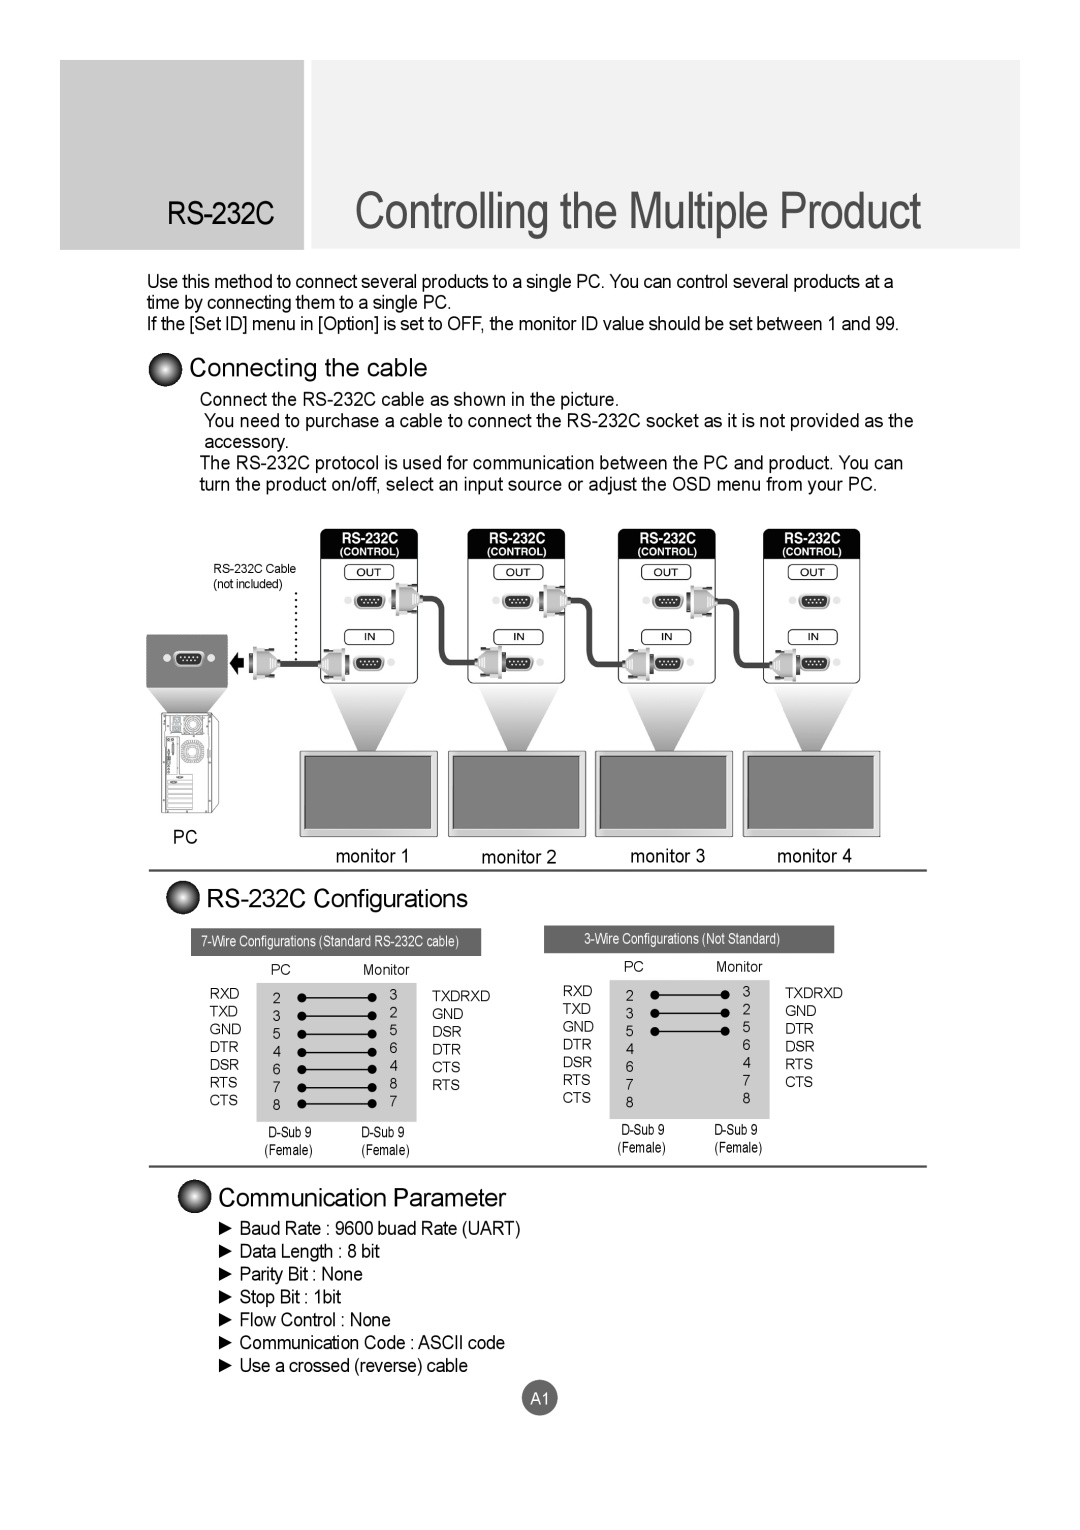 LG Electronics M5520C, M4720C Controlling the Multiple Product, Connecting the cable, RS-232C Configurations 